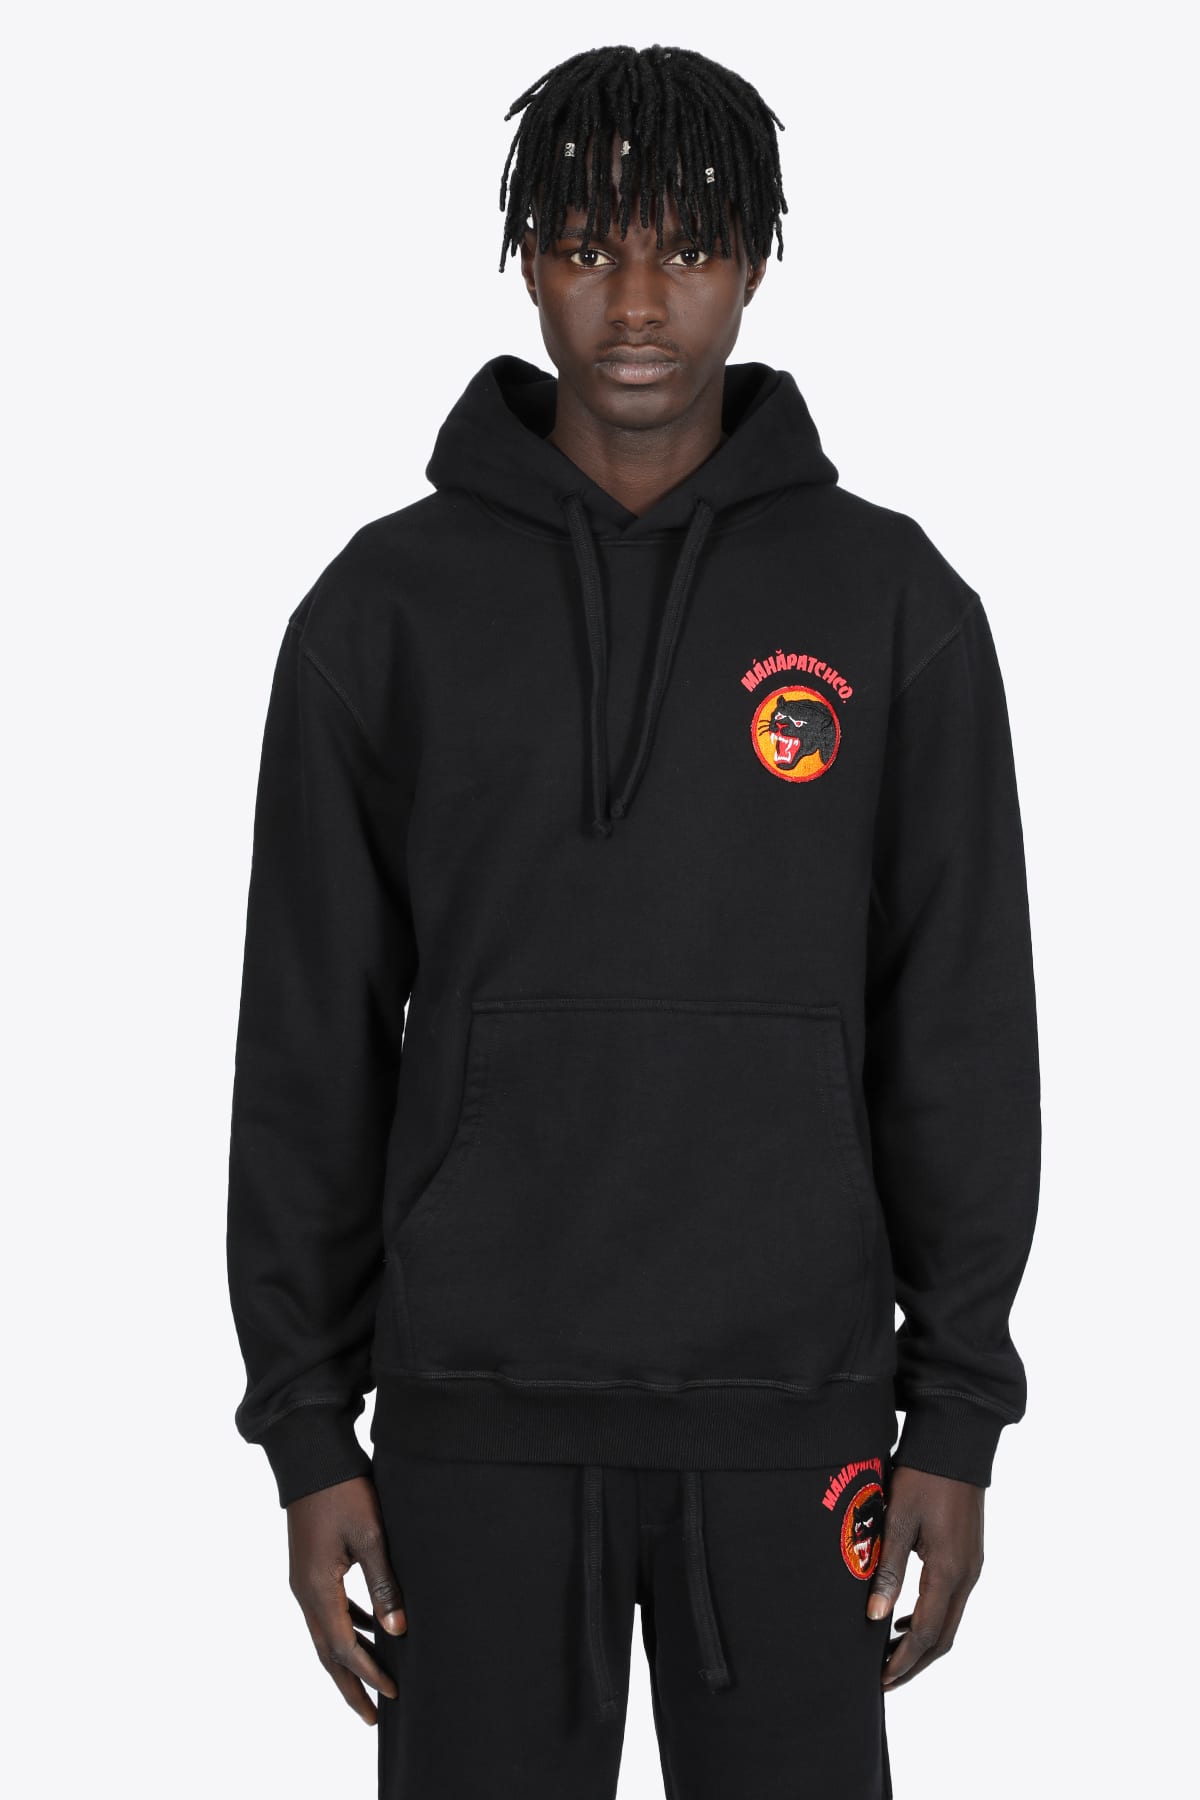 Maharishi Vintage Panther Path Hoody Black hoodie with panther patch